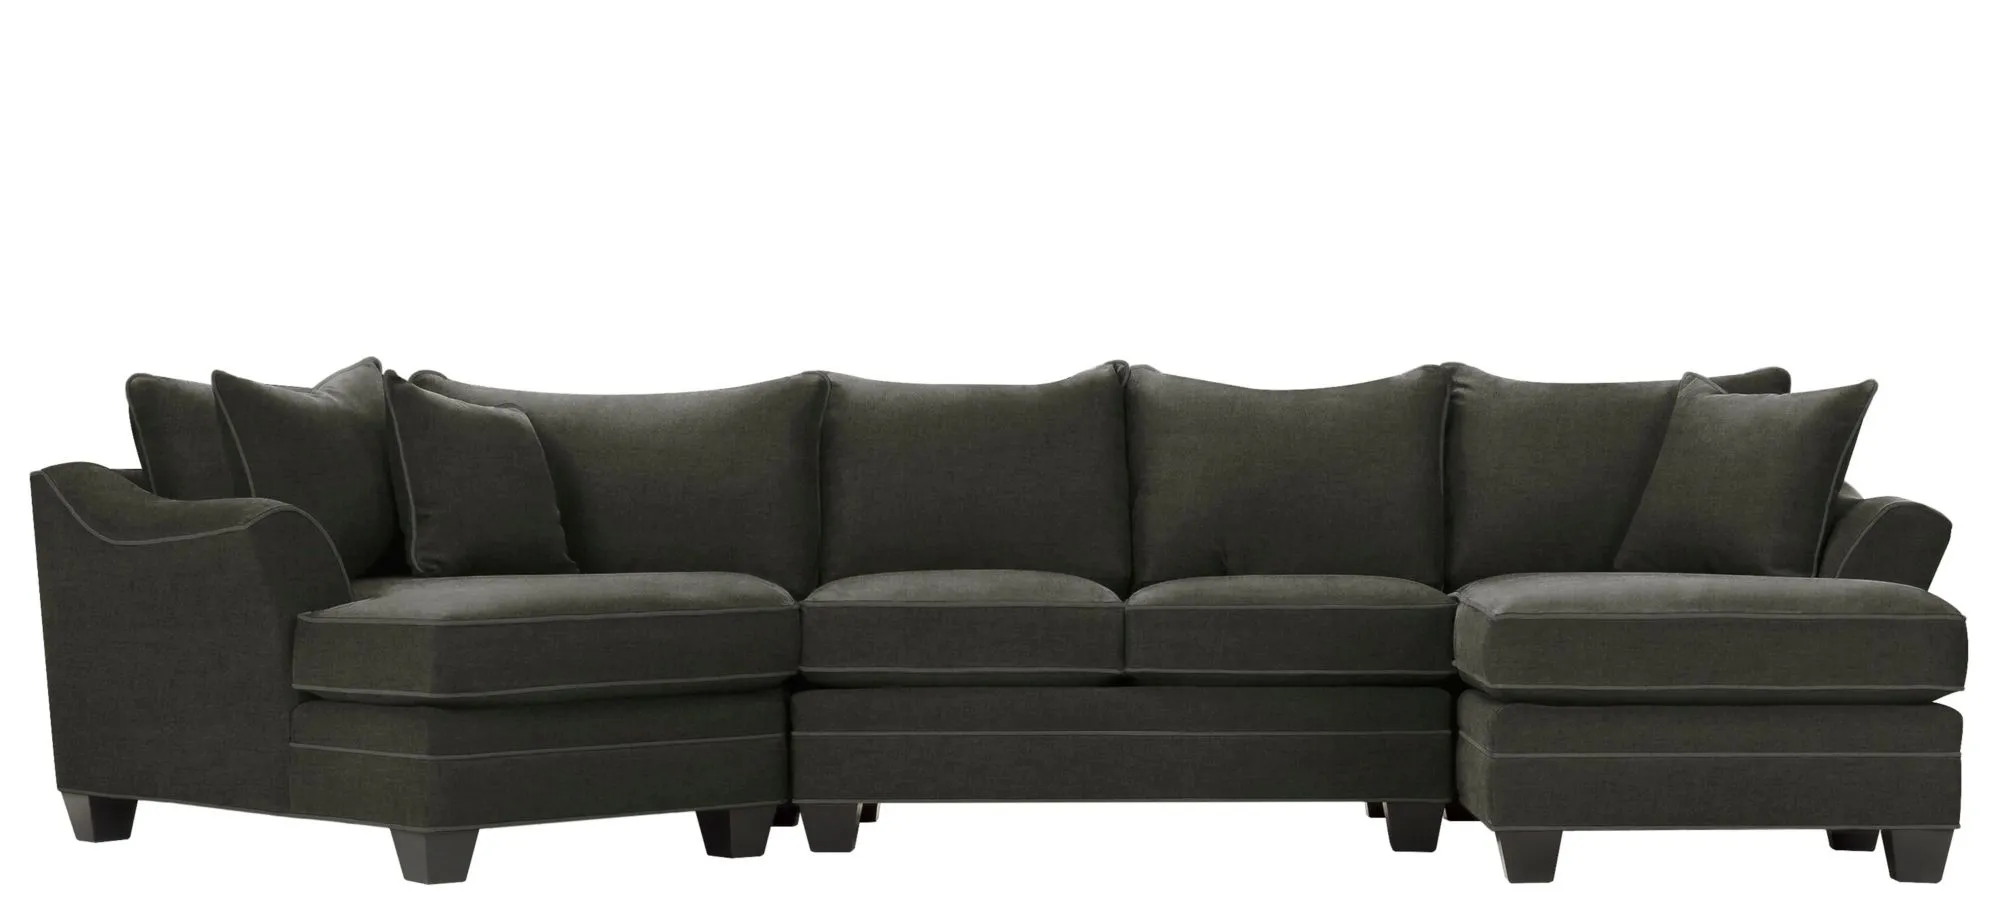 Foresthill 3-pc. Right Hand Facing Sectional Sofa in Santa Rosa Slate by H.M. Richards